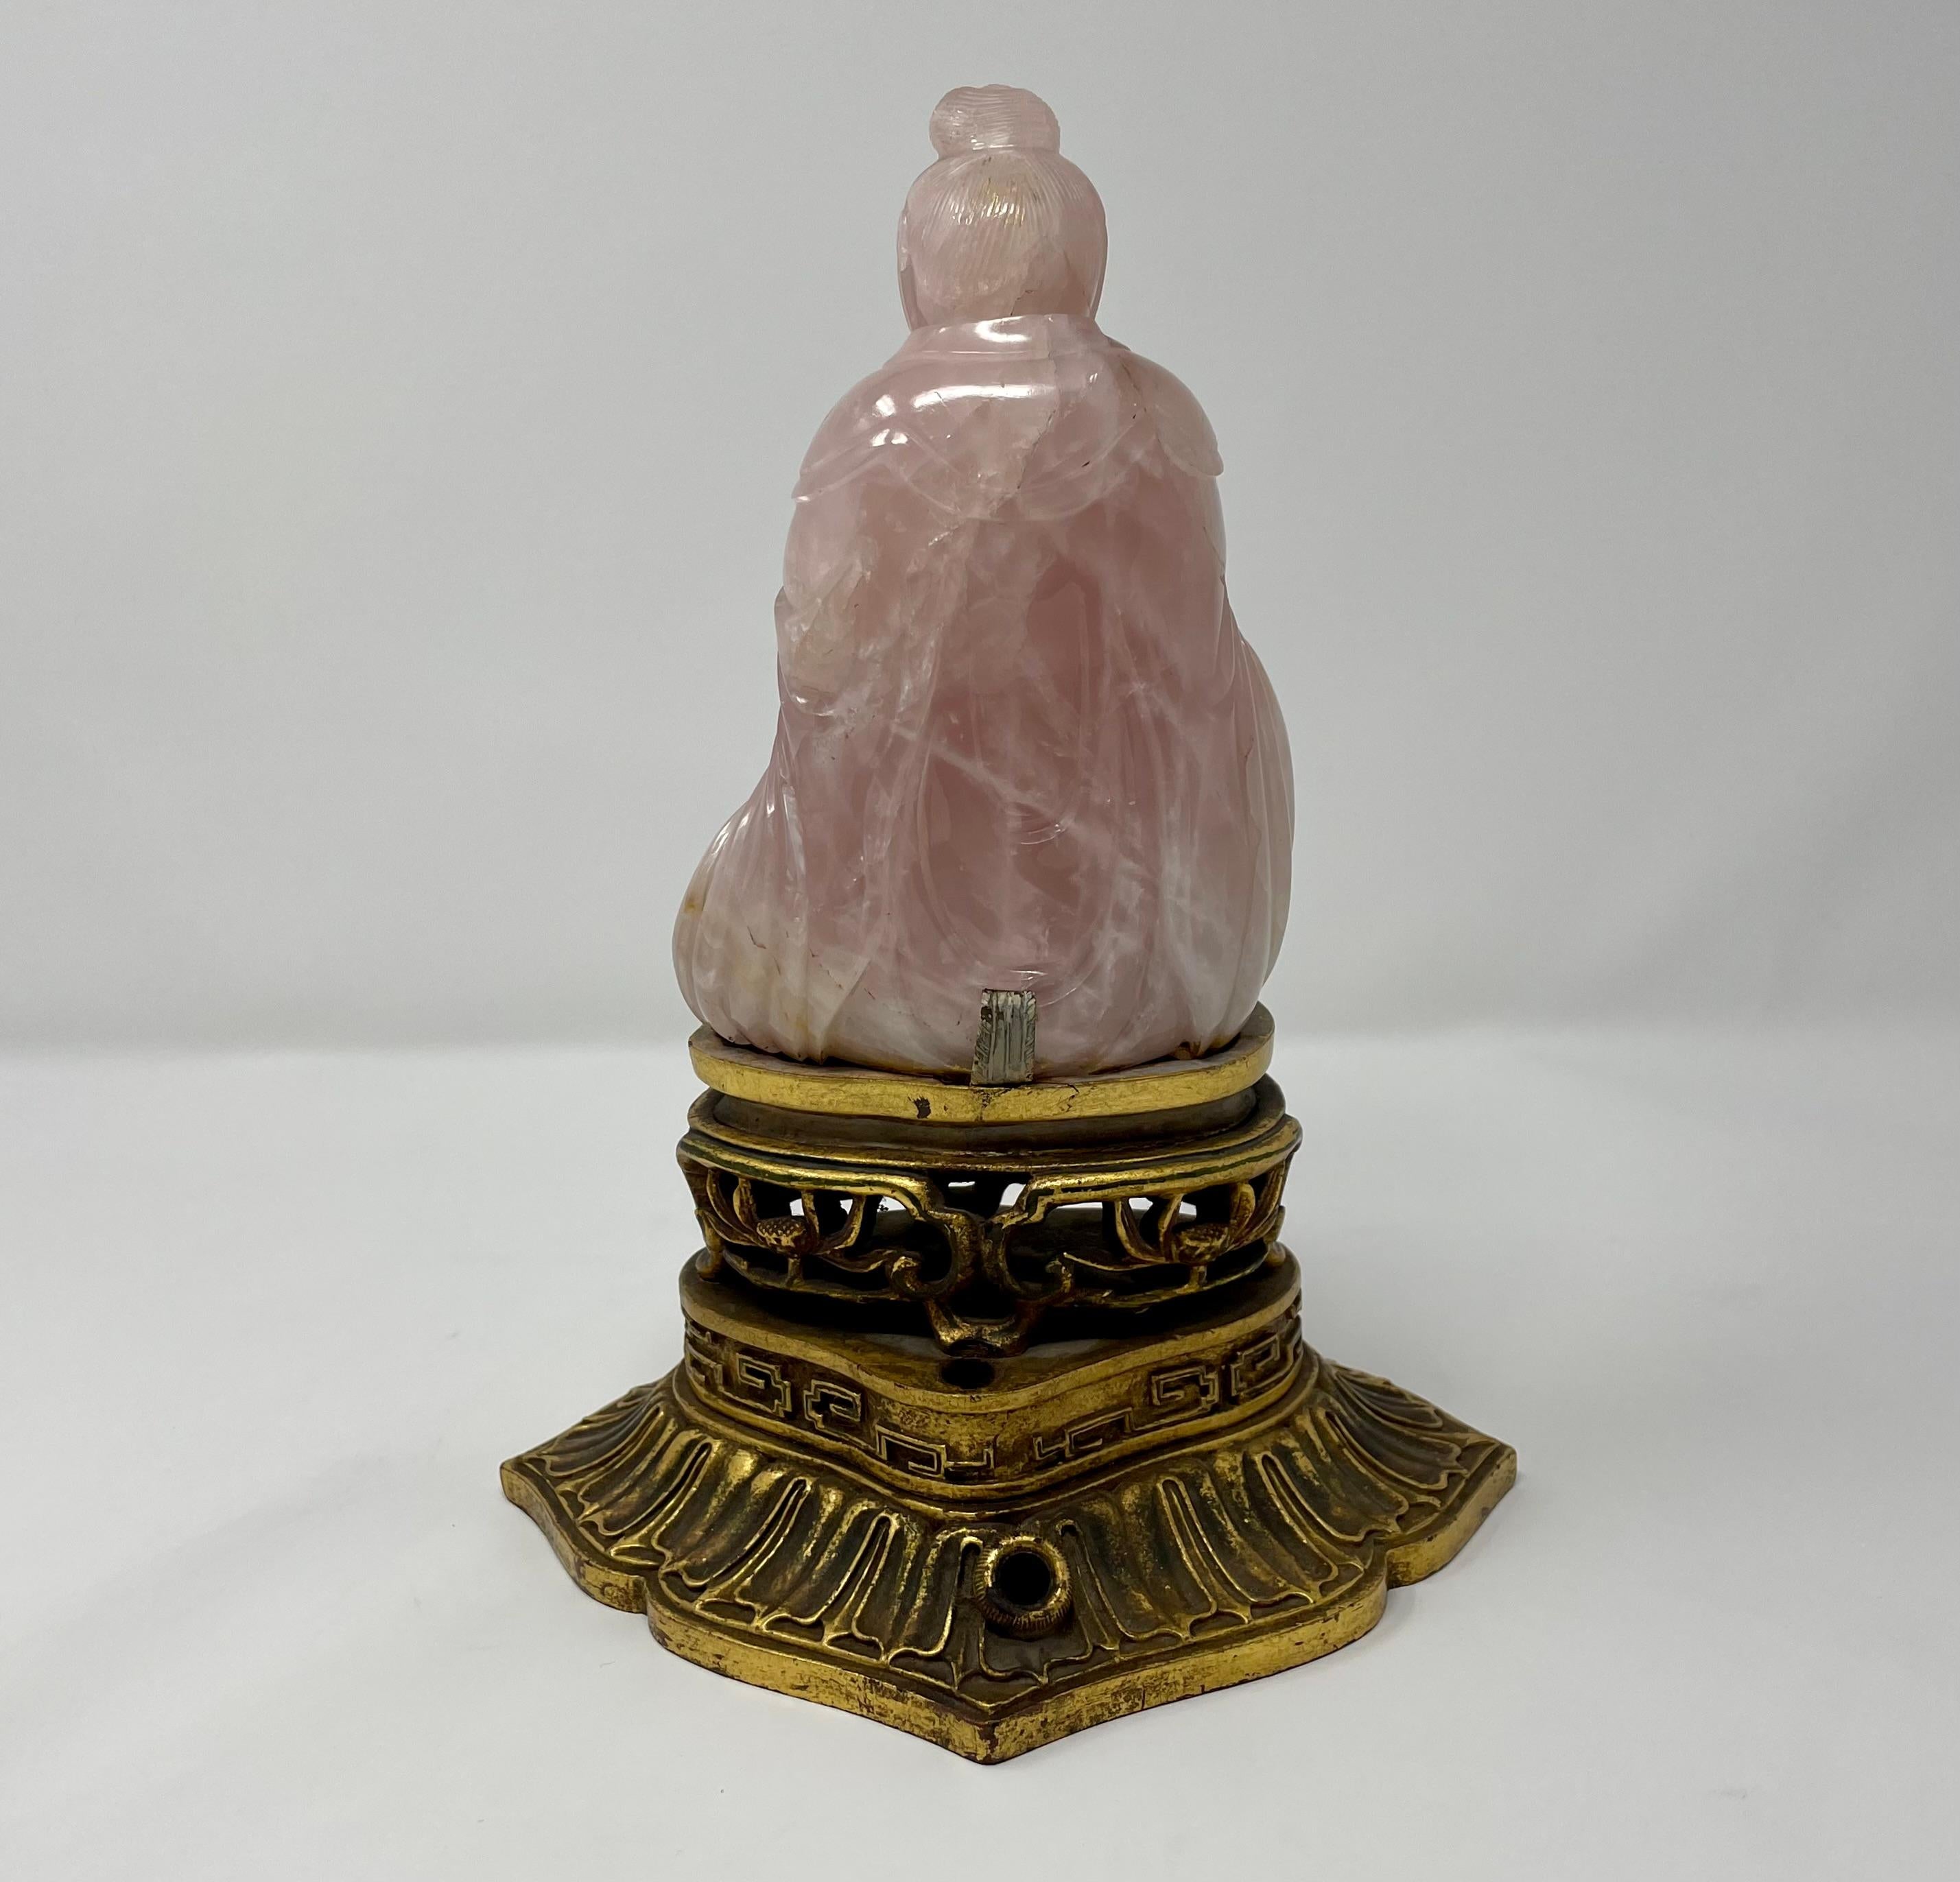 19th Century Antique Rose Quartz Kuan Yin Chinese Figure with Carved Wood Base